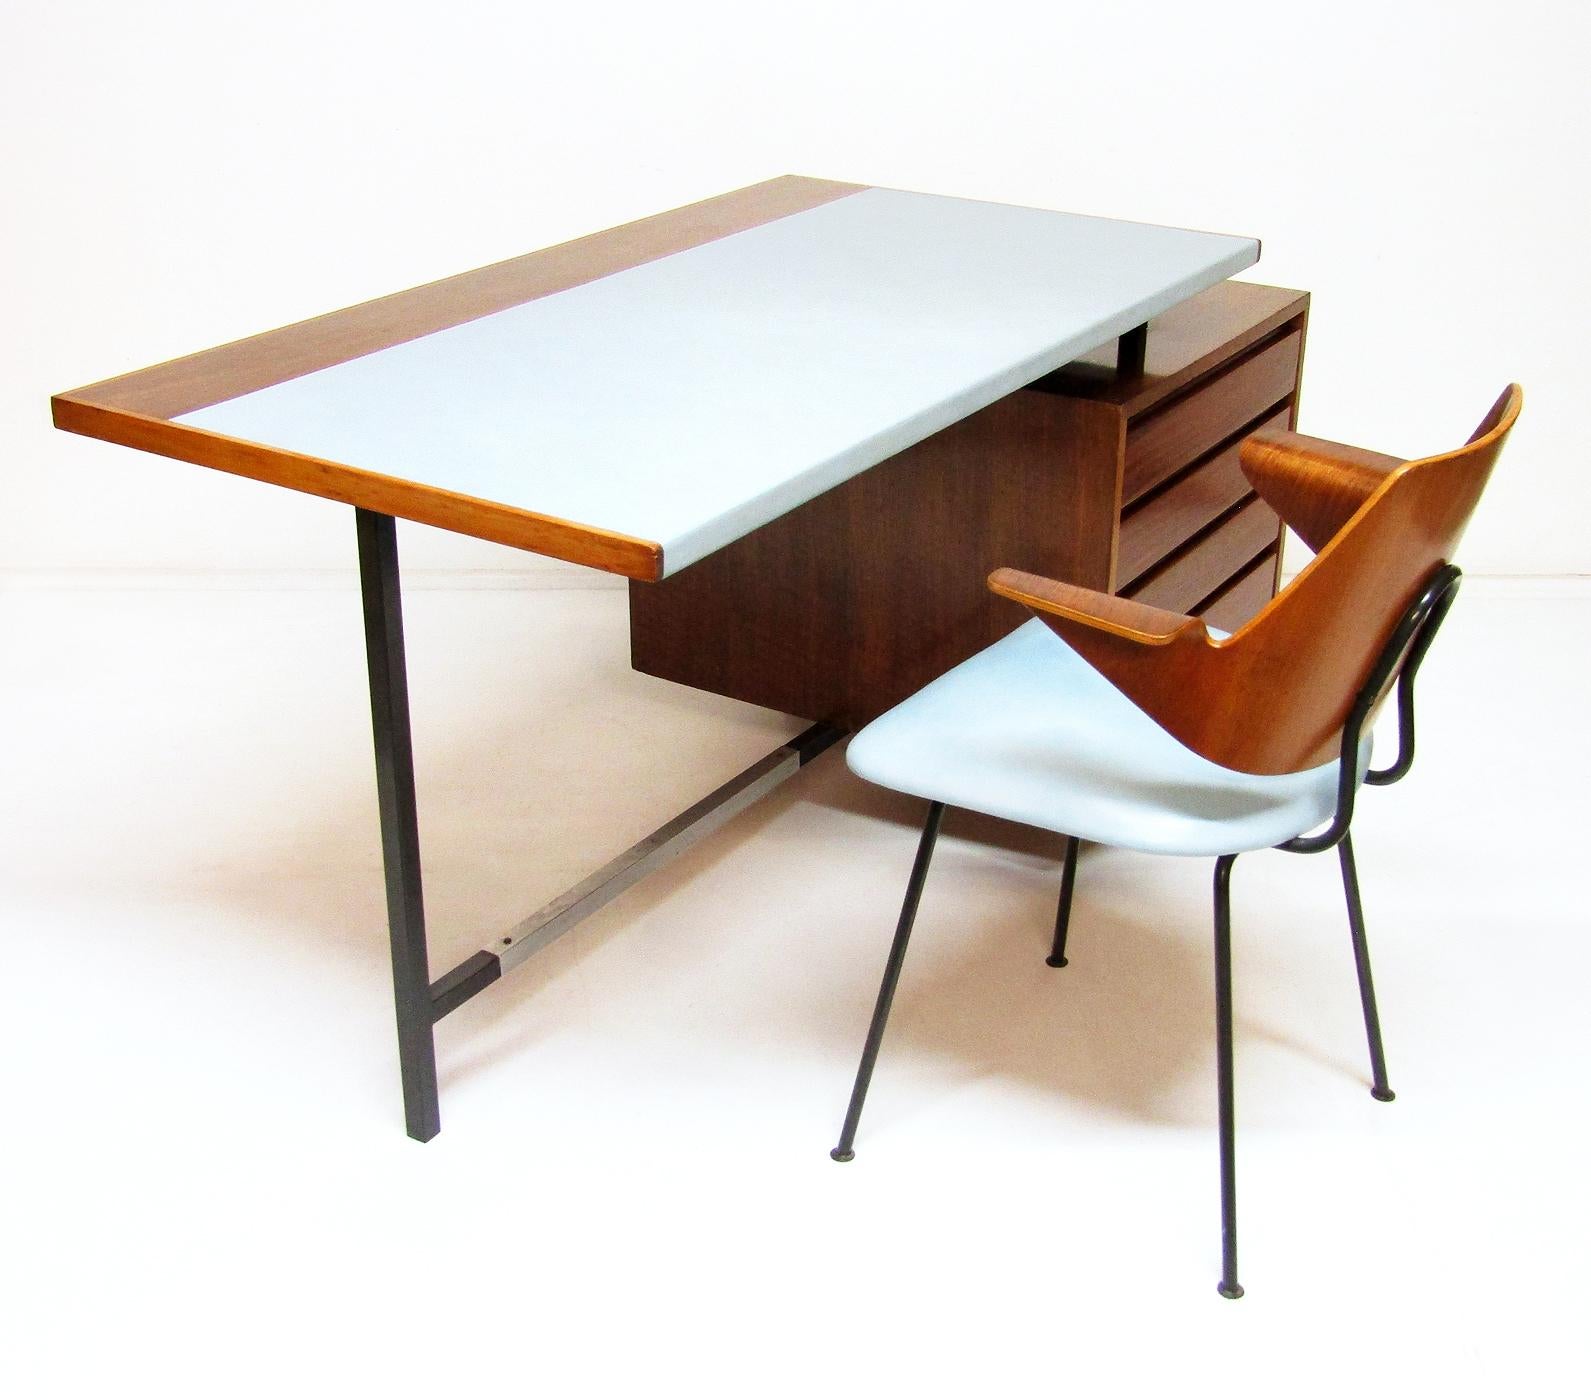 A rare 1950s modernist desk and chair set by Robin Day for Hille.

The desk is the 